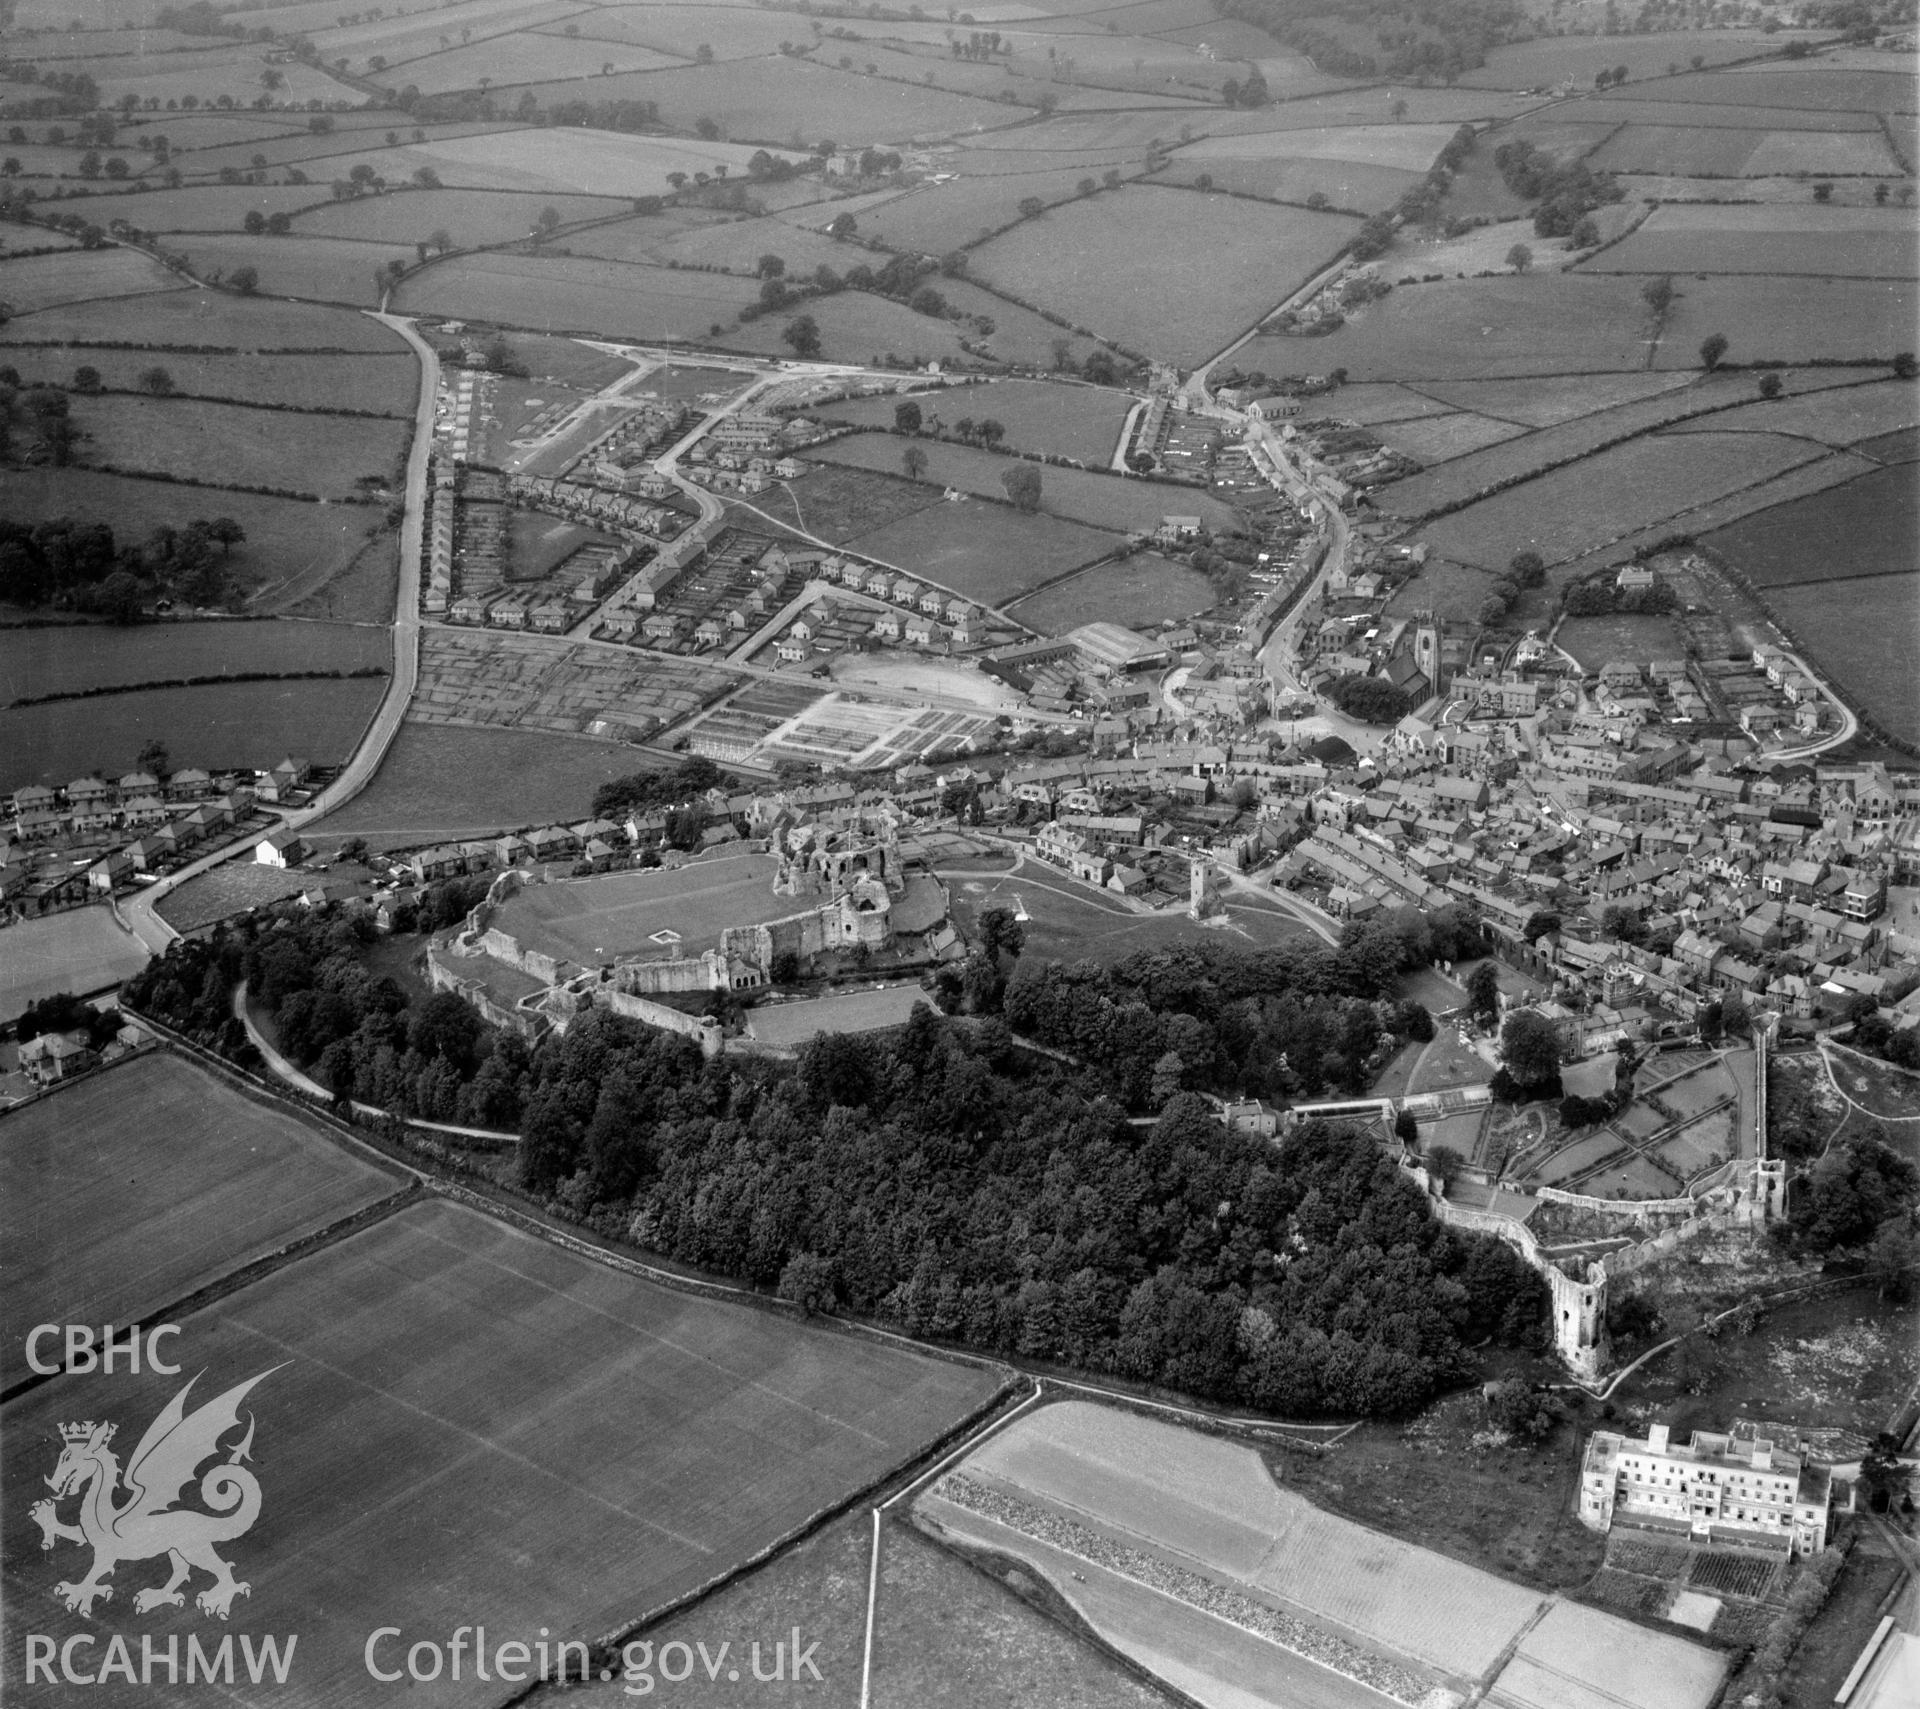 View of Denbigh showing castle and new housing